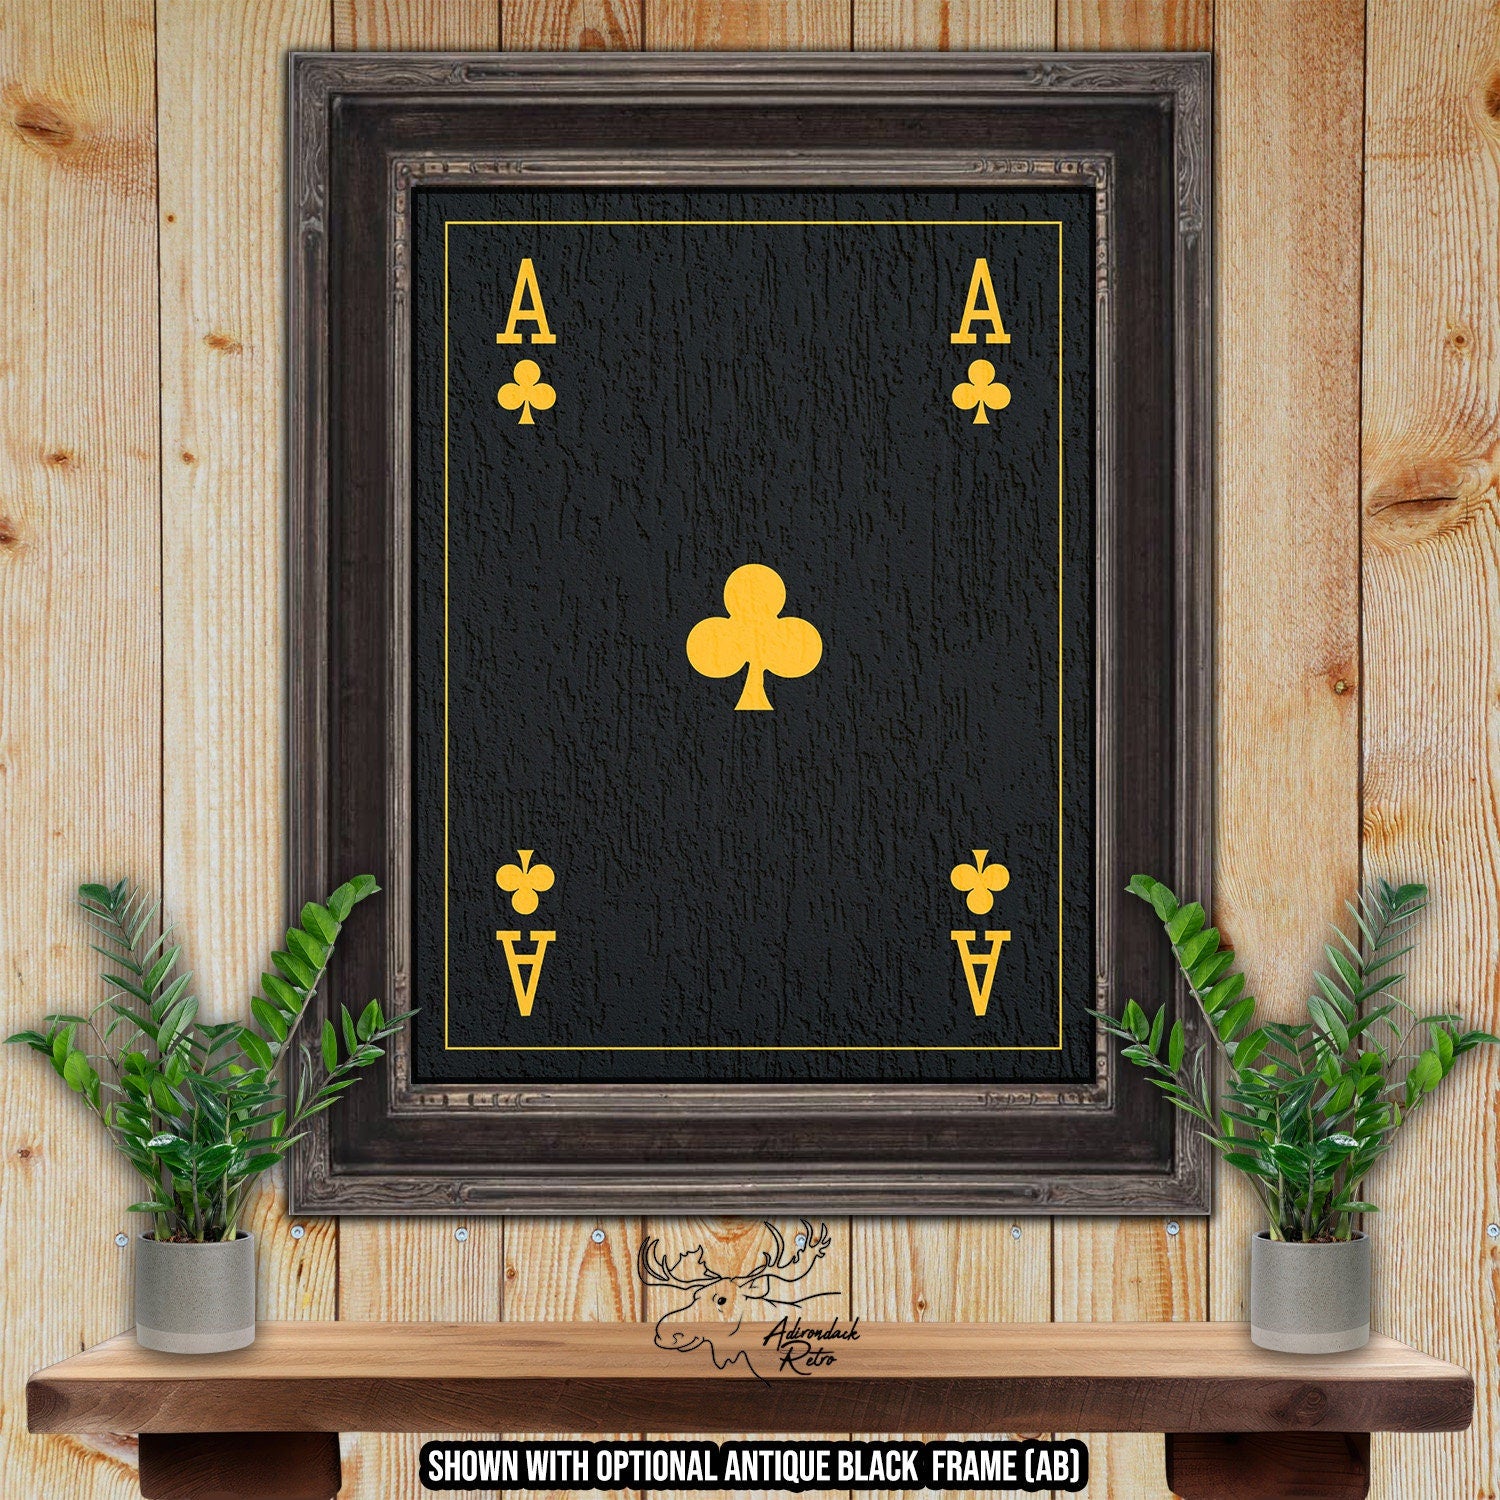 Ace of Clubs Playing Card - Black & Gold Fine Art Print at Adirondack Retro